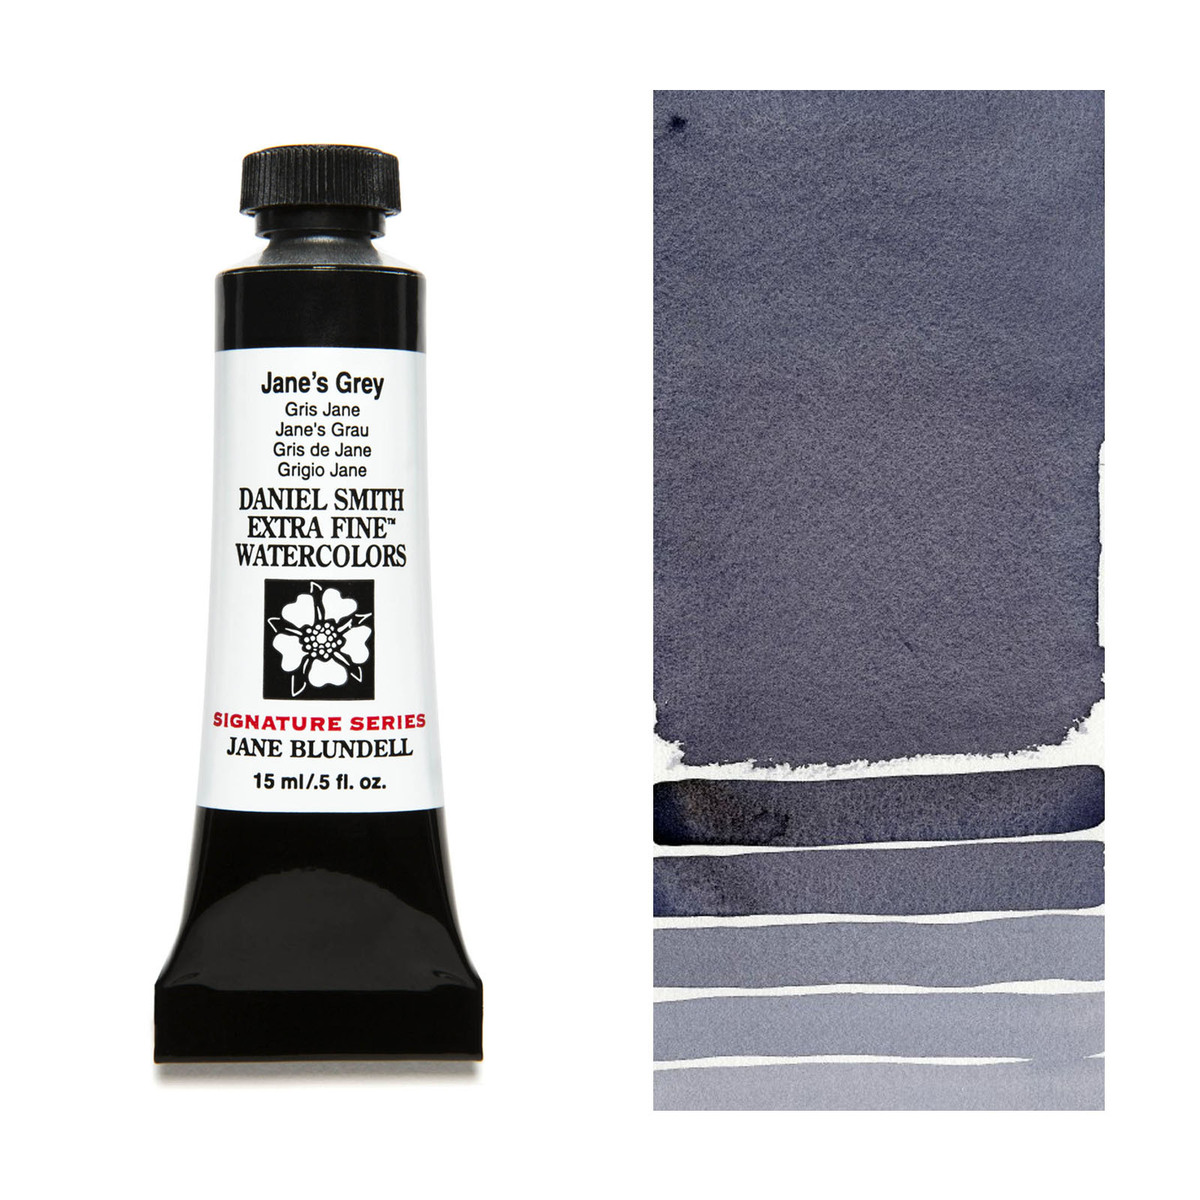 Daniel Smith JANES GREY Watercolour and all your other Discount Art Supplies are available online and in store at The PaintBox in the Adelaide Hills and can be delivered anywhere in Australia or New Zealand.